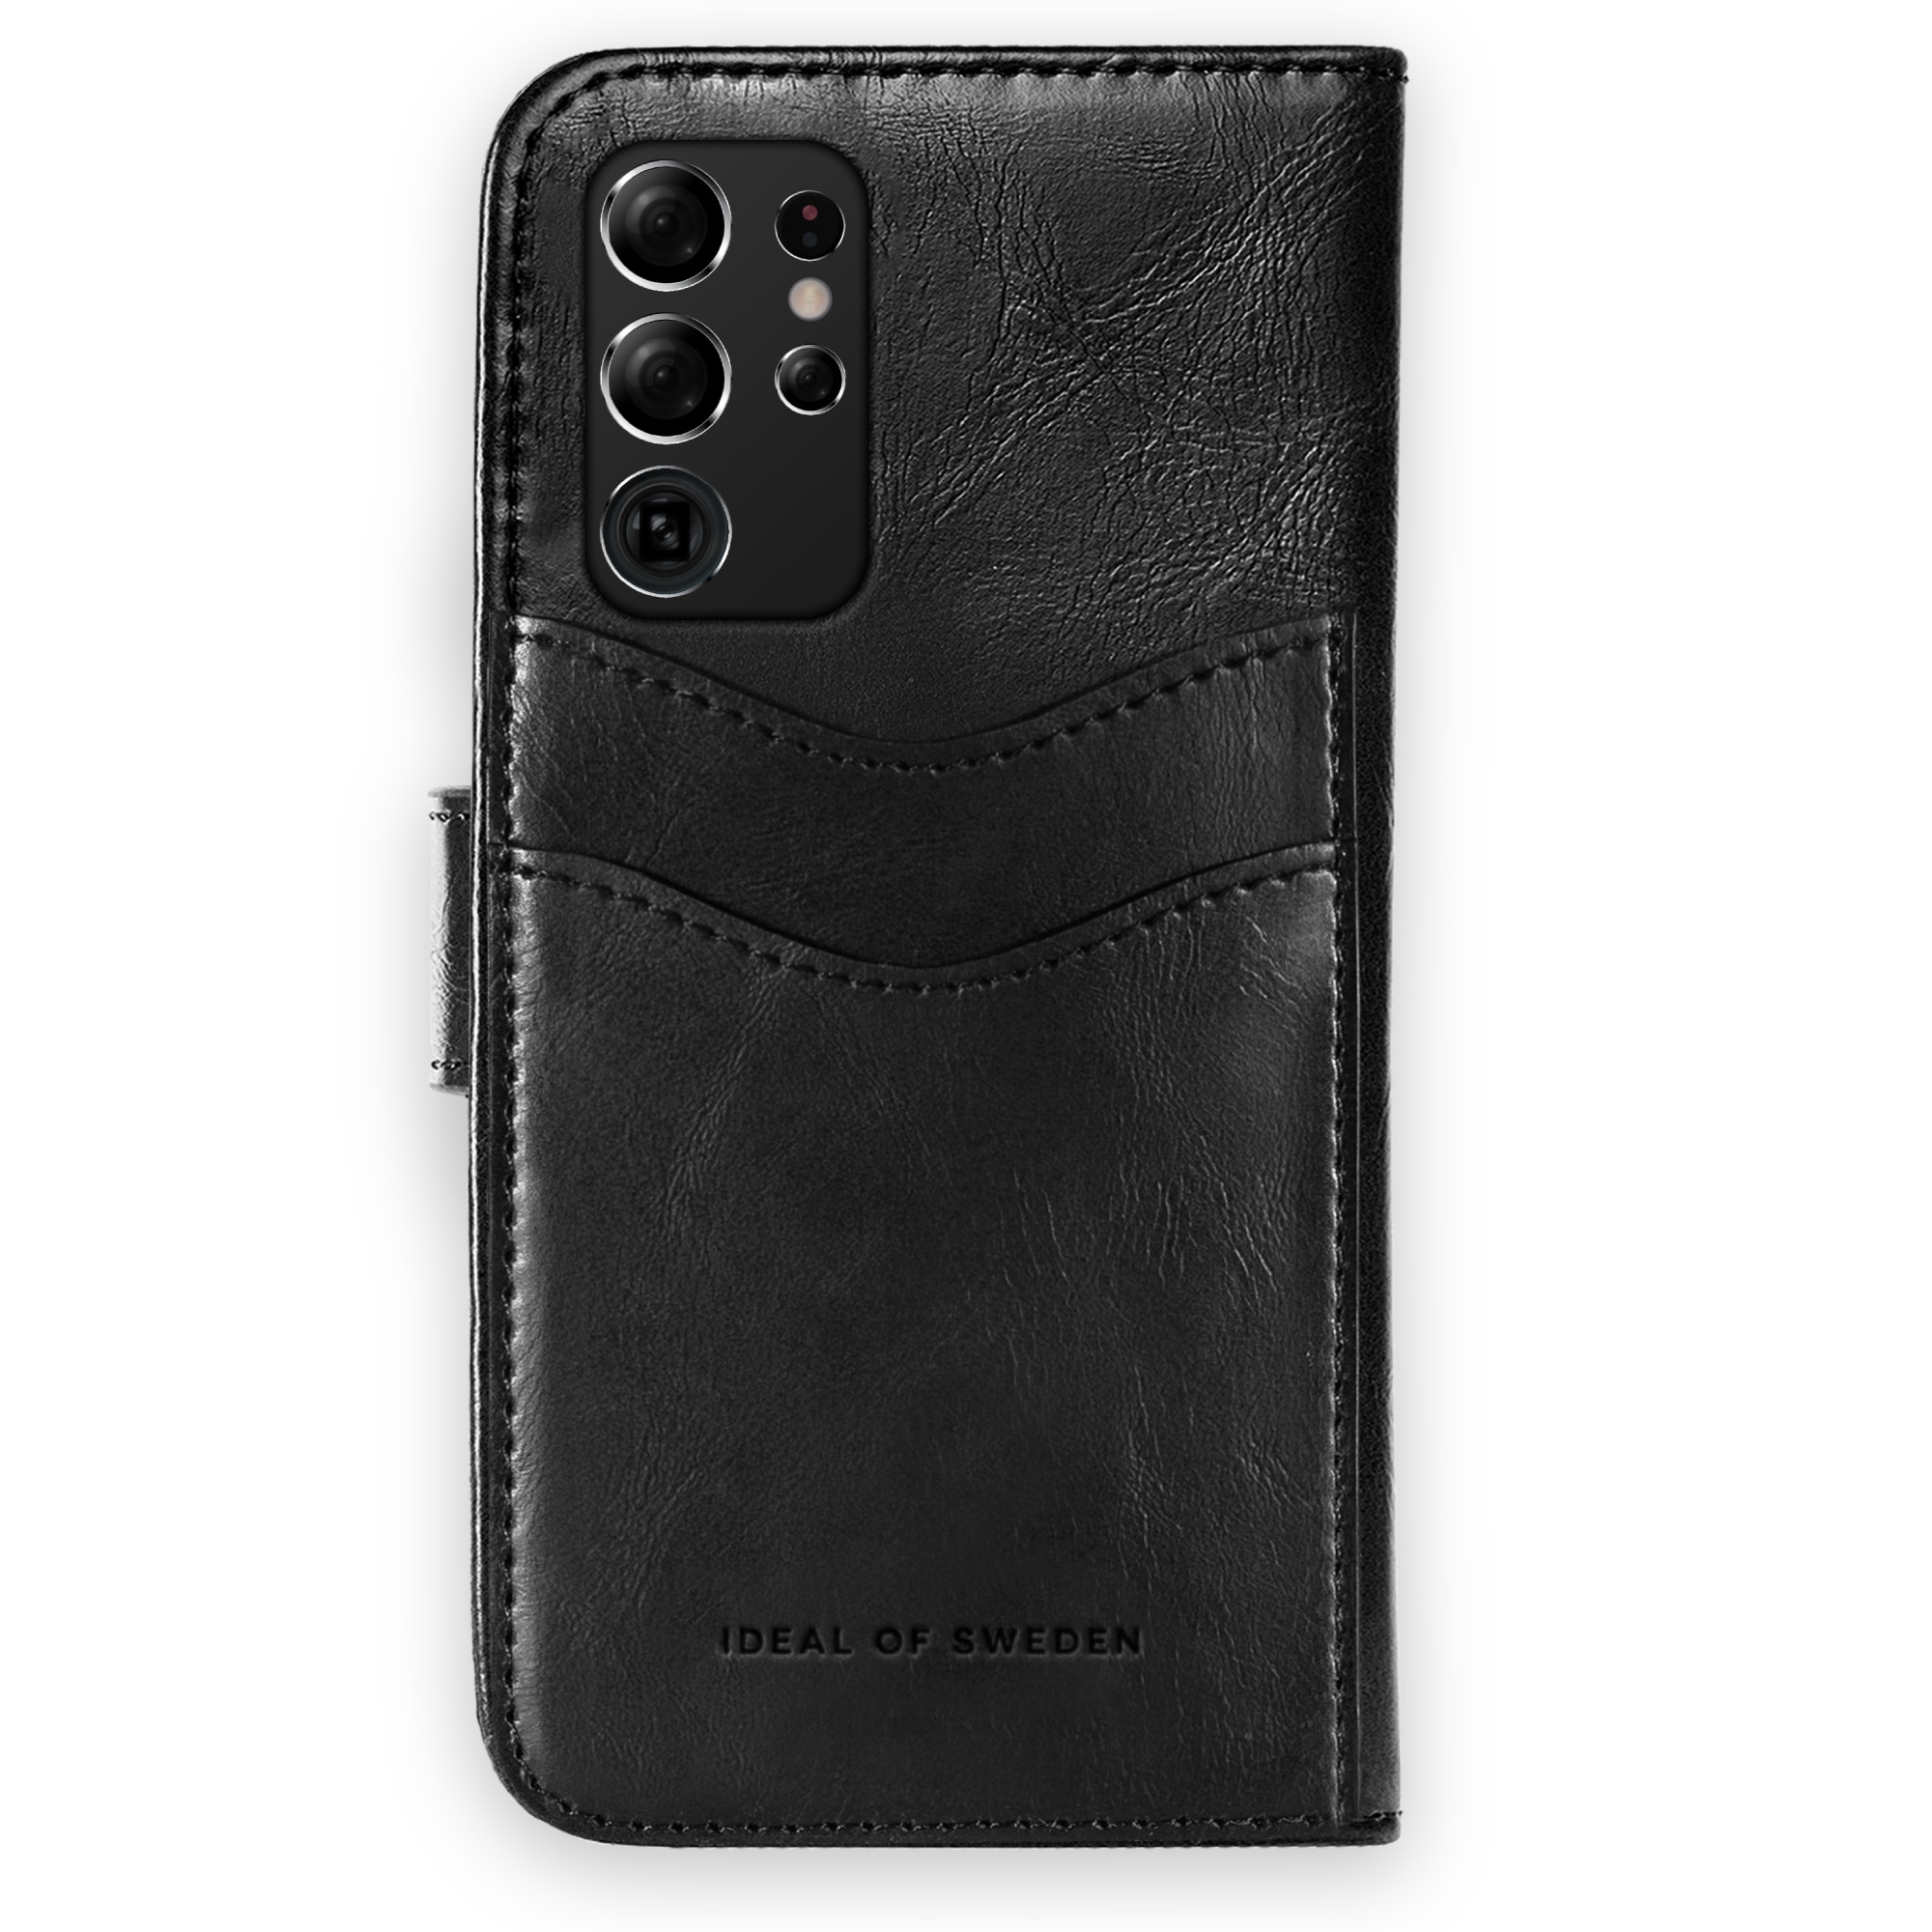 Samsung Galaxy S21 Ultra Magnet Wallet+ Cover Black